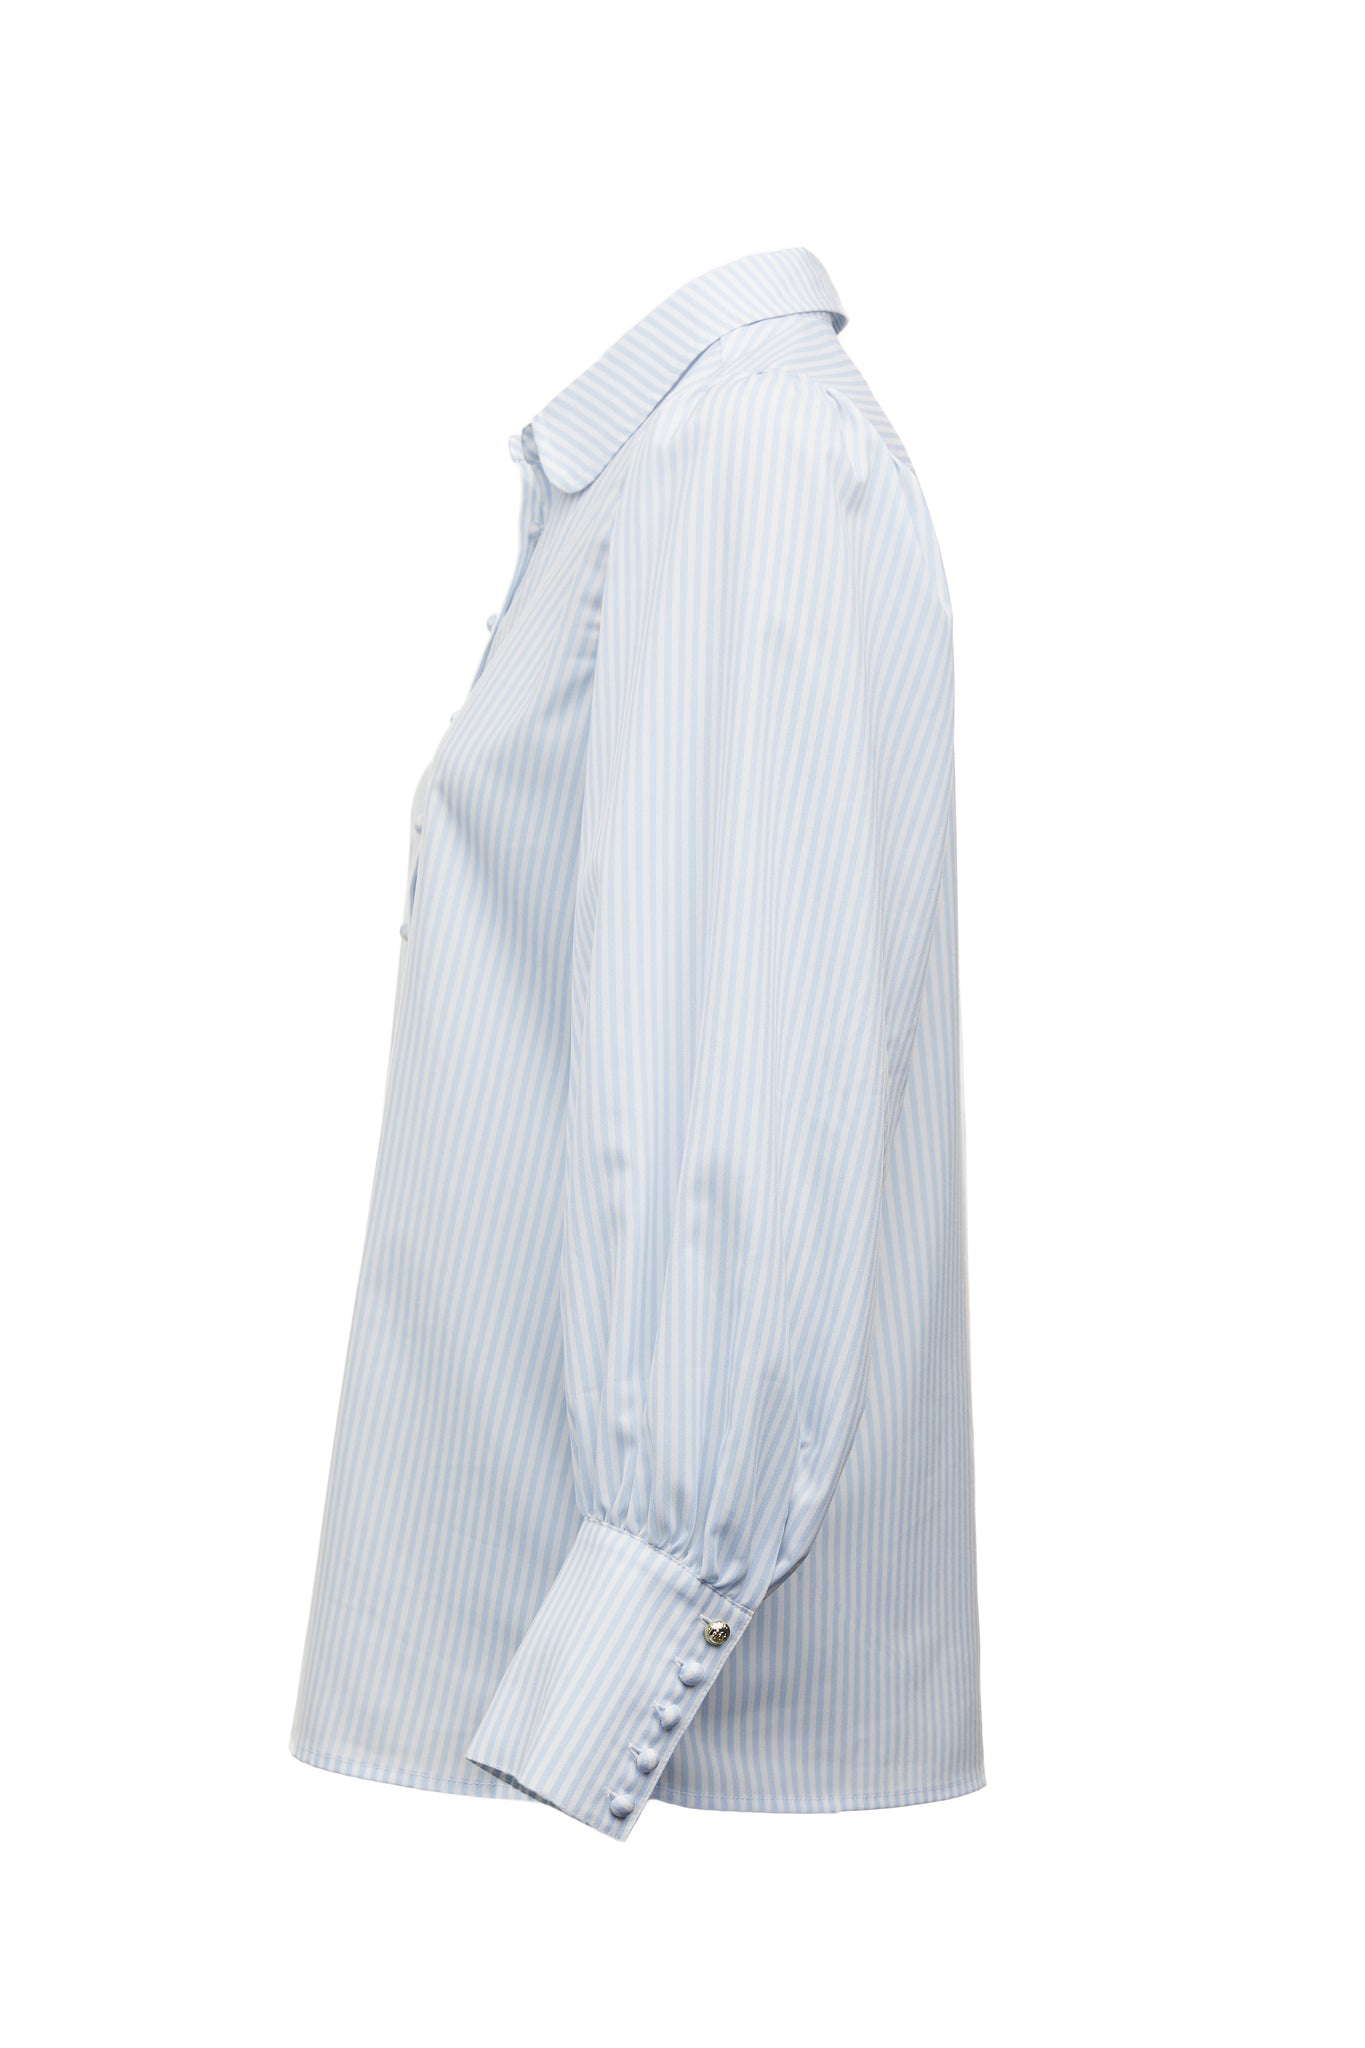 side image of classic fitted shirt with long sleeves and subtle puffy shoulders with thin blue and white stipe print design with extra long cuffs and rounded collar detailed with fabric buttons 